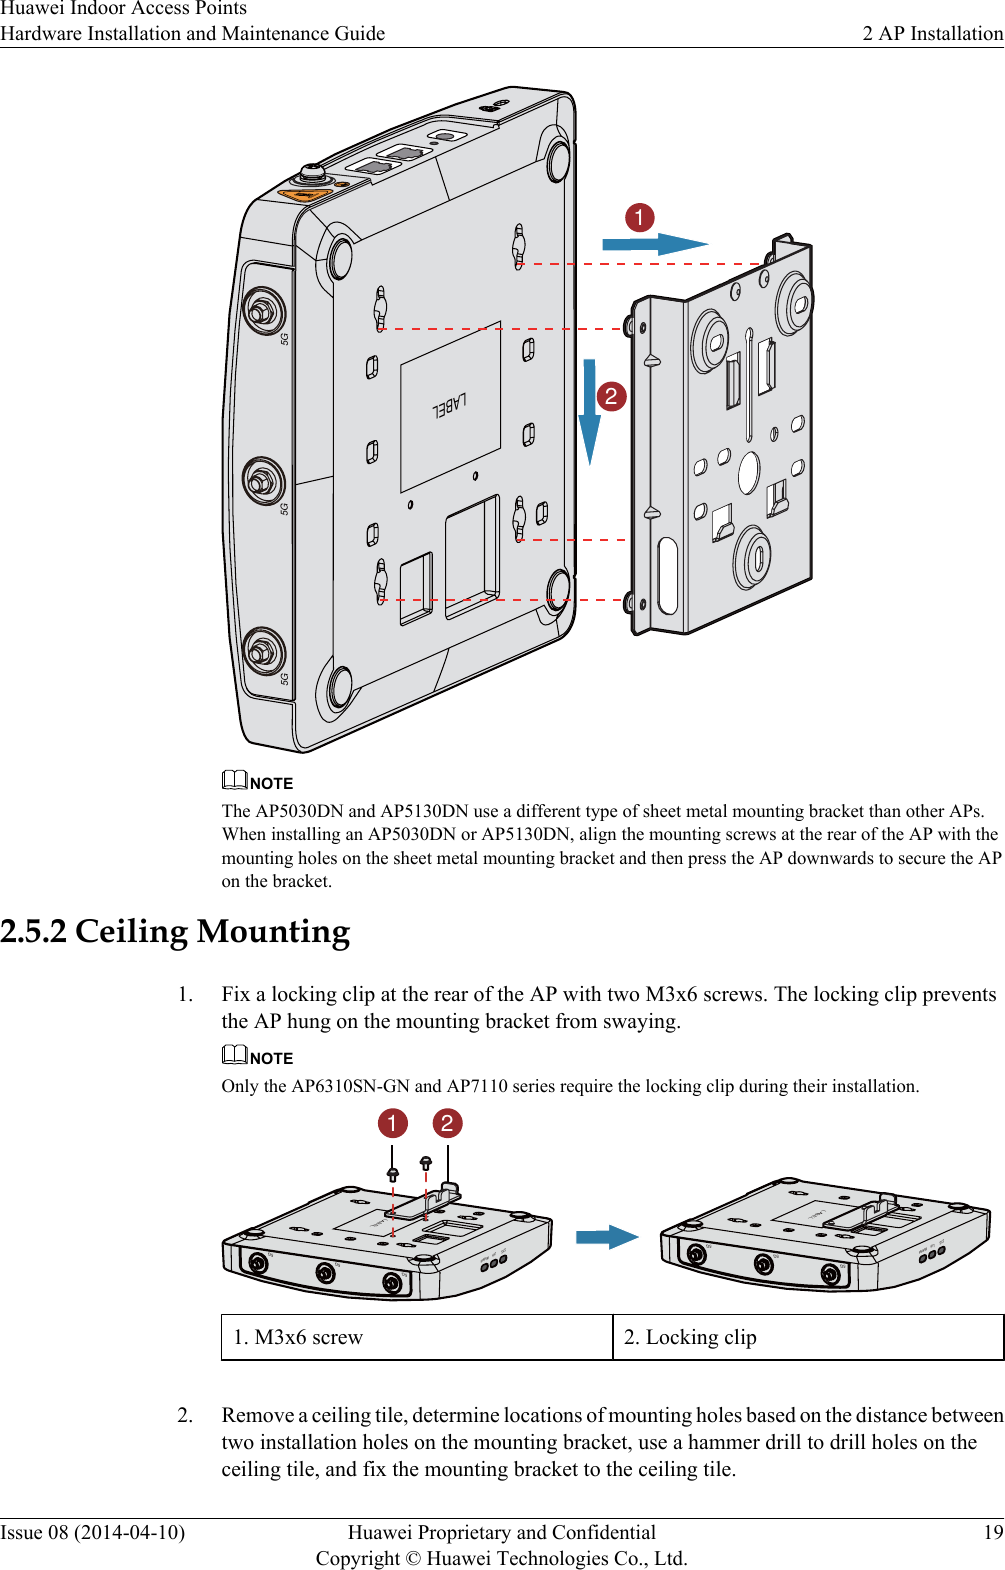 125G 5G 5GLABELNOTEThe AP5030DN and AP5130DN use a different type of sheet metal mounting bracket than other APs.When installing an AP5030DN or AP5130DN, align the mounting screws at the rear of the AP with themounting holes on the sheet metal mounting bracket and then press the AP downwards to secure the APon the bracket.2.5.2 Ceiling Mounting1. Fix a locking clip at the rear of the AP with two M3x6 screws. The locking clip preventsthe AP hung on the mounting bracket from swaying.NOTEOnly the AP6310SN-GN and AP7110 series require the locking clip during their installation.5G5G5GLABELSYS Link Wireless5G5G5GLABELSYS Link Wireless1 21. M3x6 screw 2. Locking clip 2. Remove a ceiling tile, determine locations of mounting holes based on the distance betweentwo installation holes on the mounting bracket, use a hammer drill to drill holes on theceiling tile, and fix the mounting bracket to the ceiling tile.Huawei Indoor Access PointsHardware Installation and Maintenance Guide 2 AP InstallationIssue 08 (2014-04-10) Huawei Proprietary and ConfidentialCopyright © Huawei Technologies Co., Ltd.19